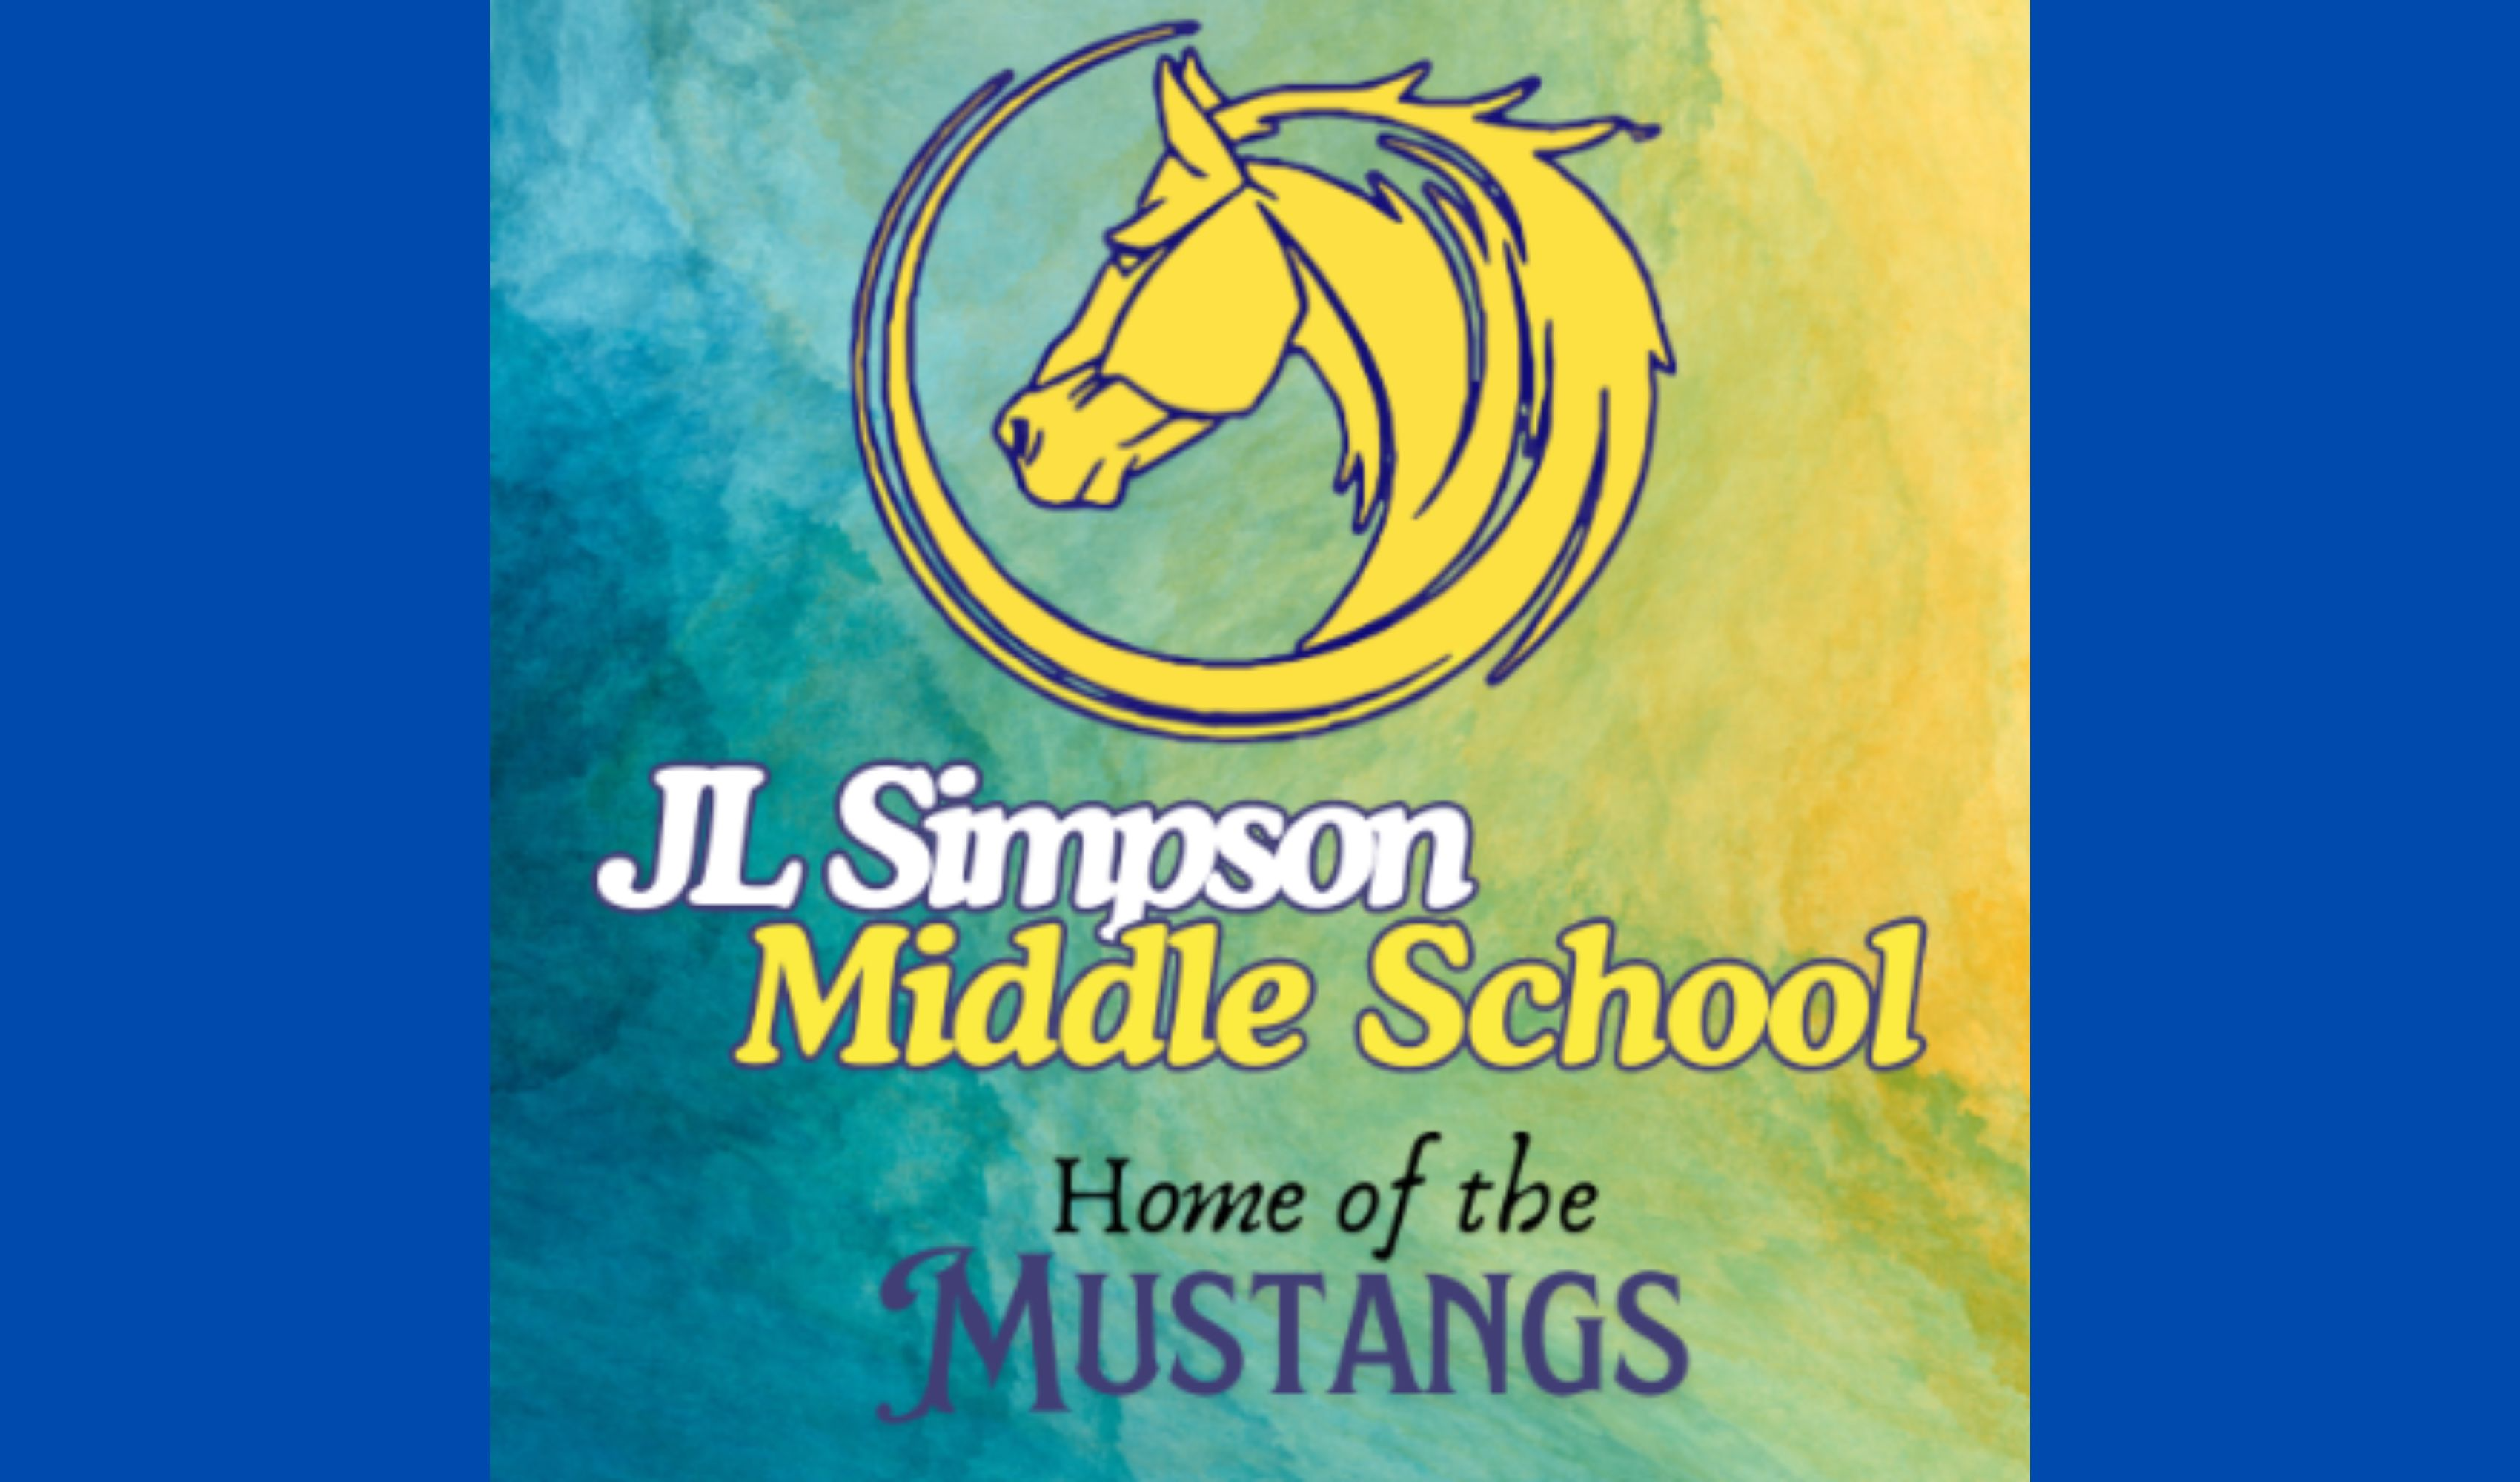 J.L. Simpson Middle School Mustangs Logo on blue and yellow background